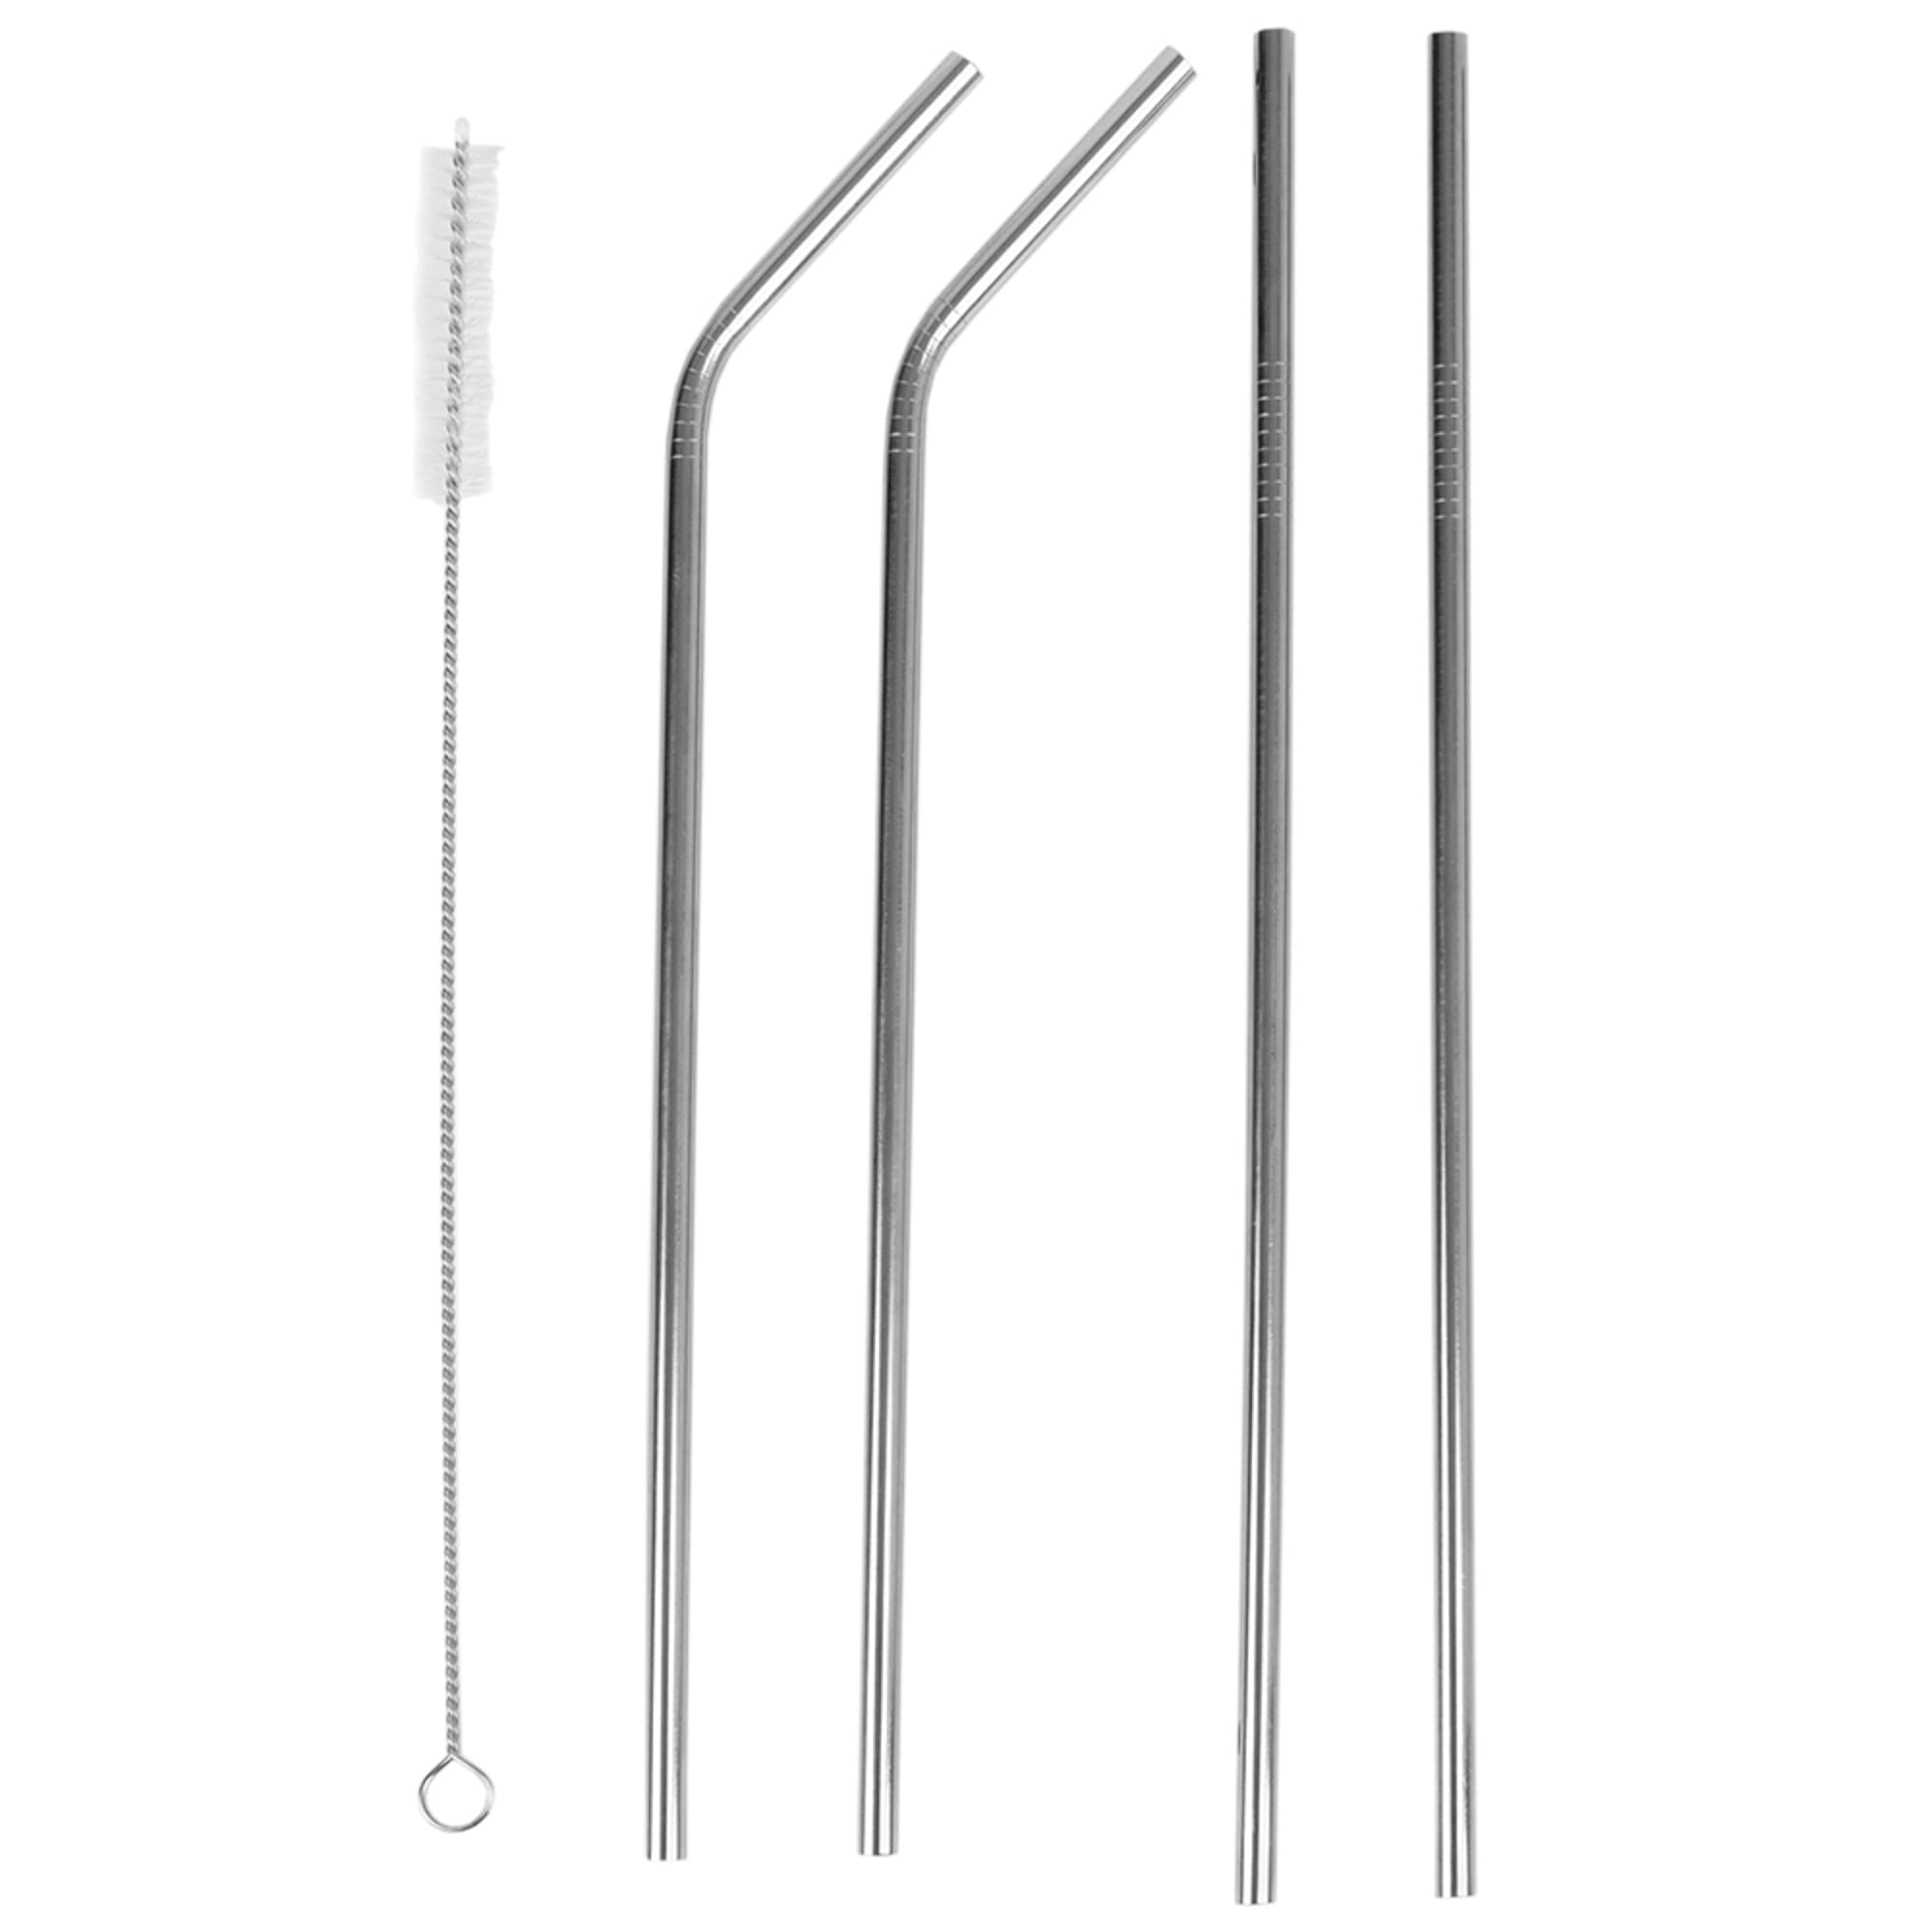 Home Basics 5 Piece Reusable Stainless Steel Drinking Straw Set, Silver $2 EACH, CASE PACK OF 24